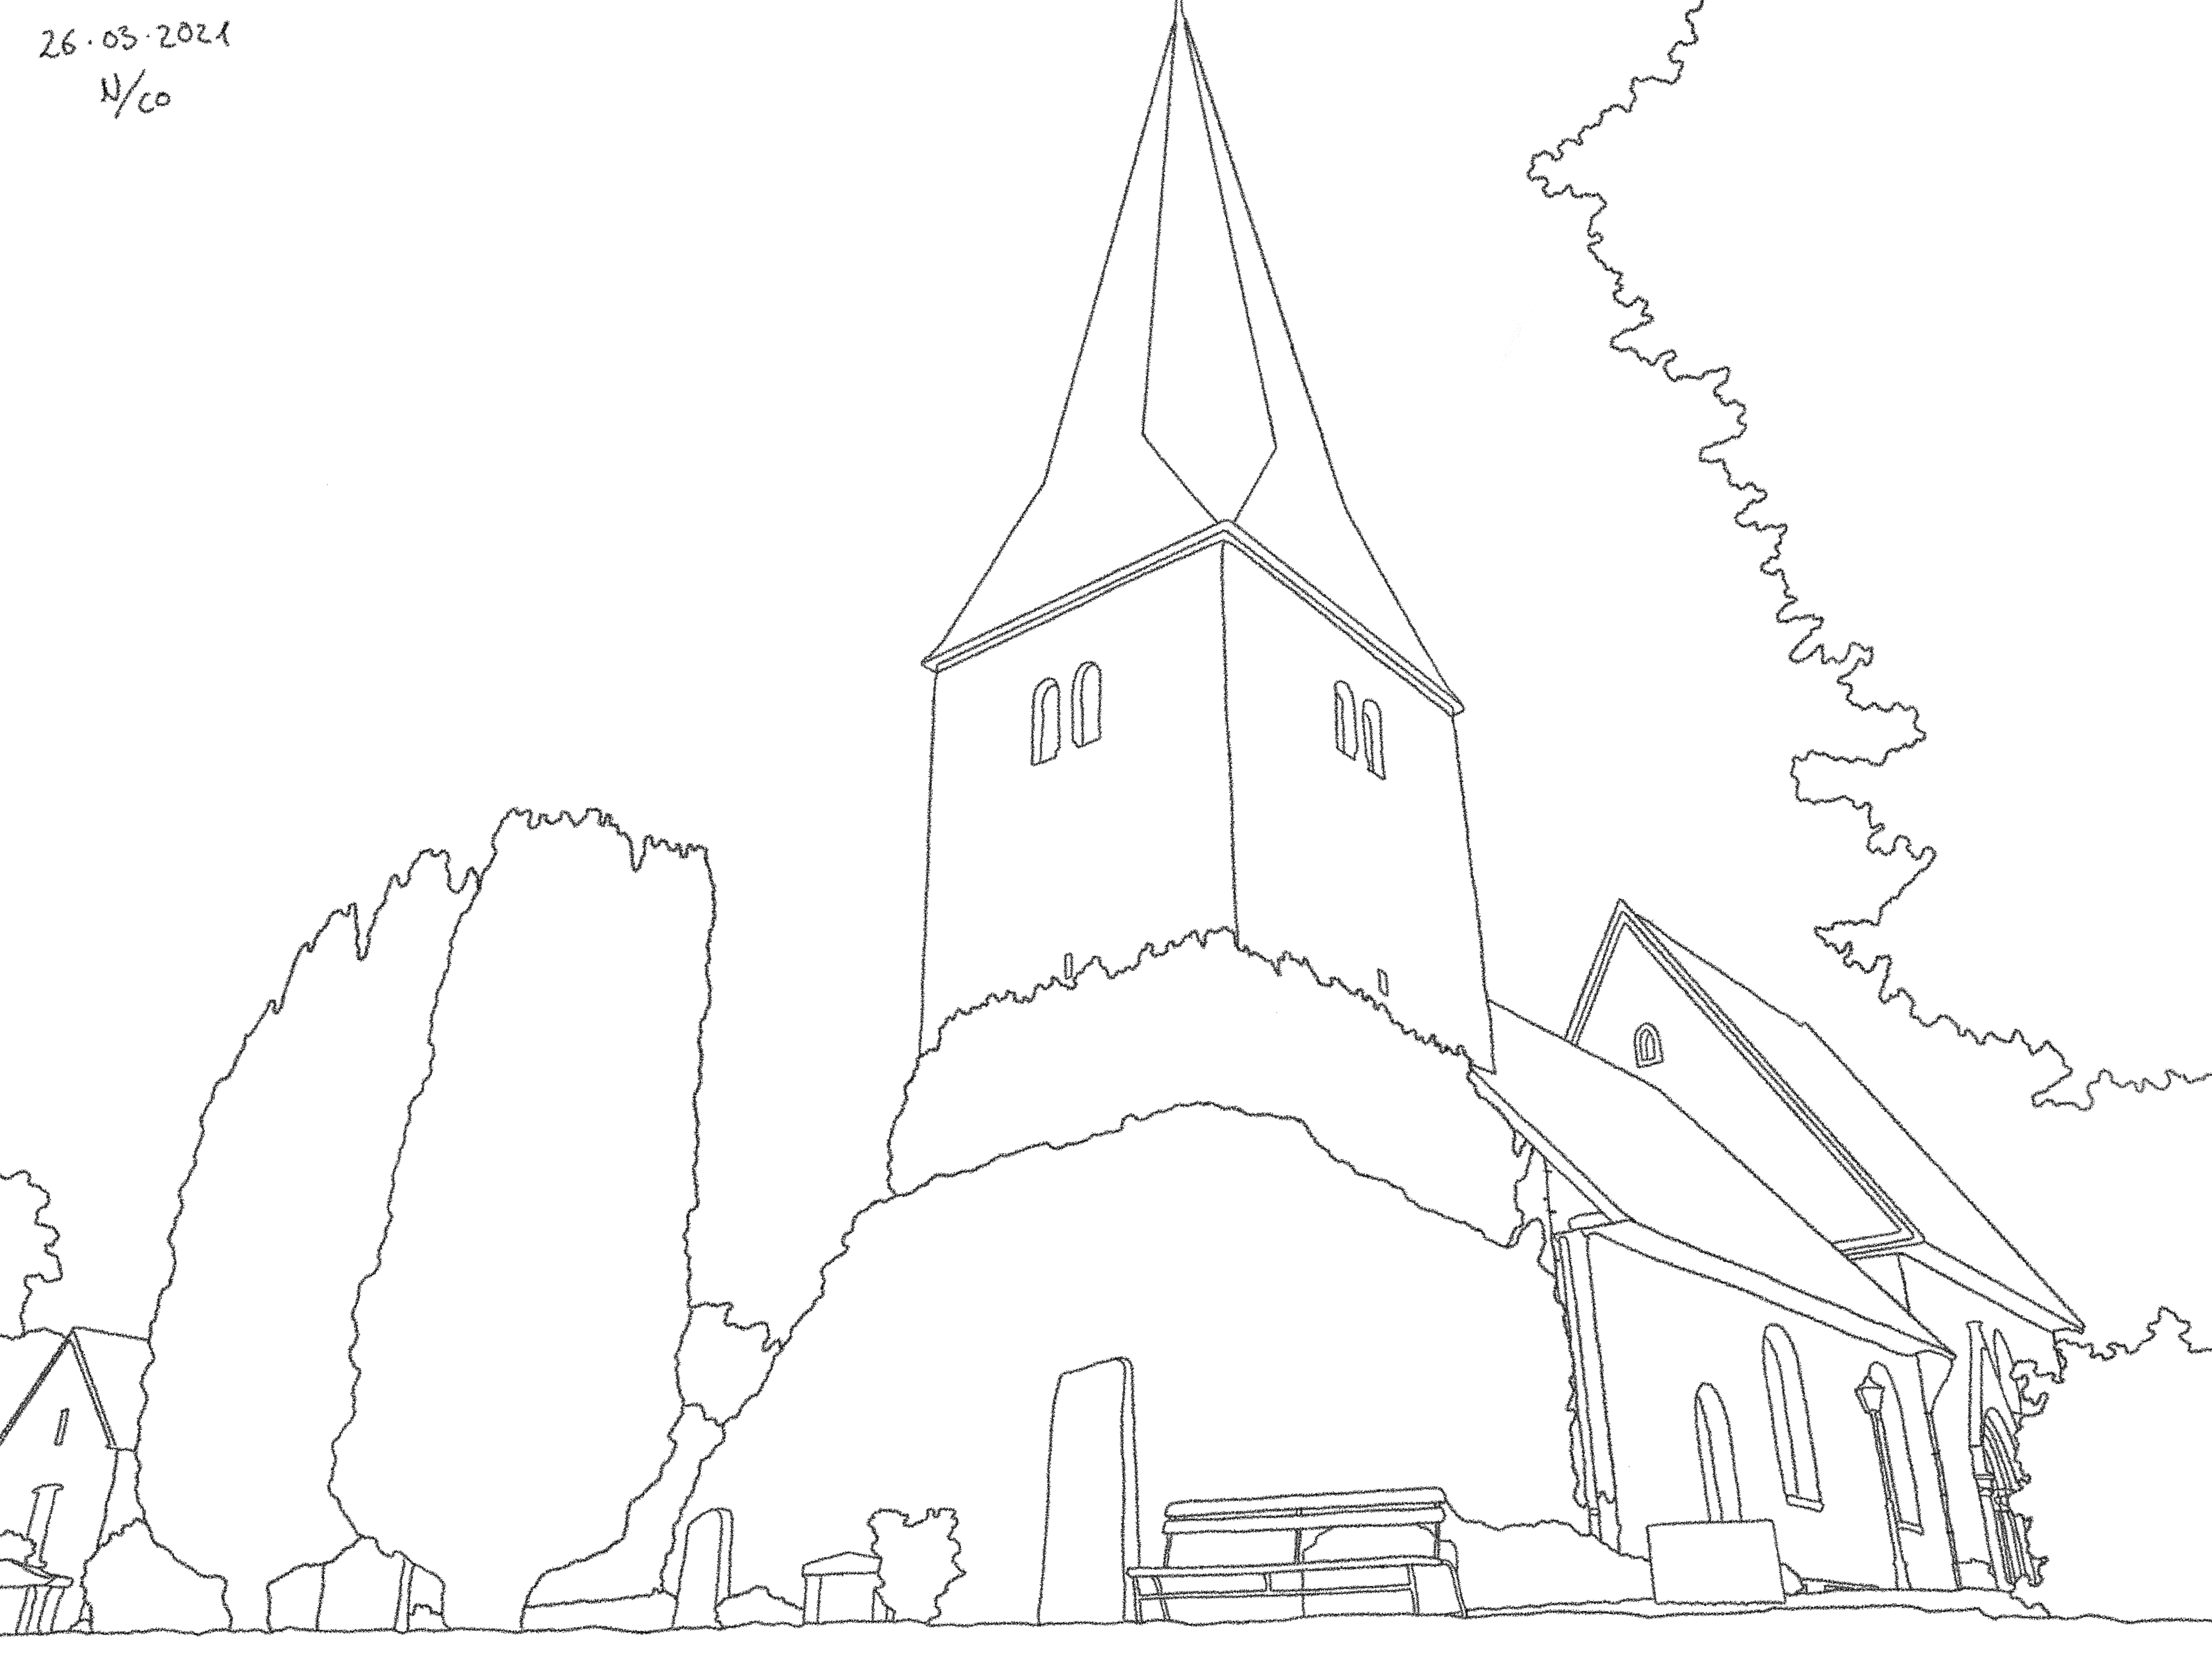 A drawing titled The Old Church, based on a photo taken at Fröjels kyrka on Gotland.